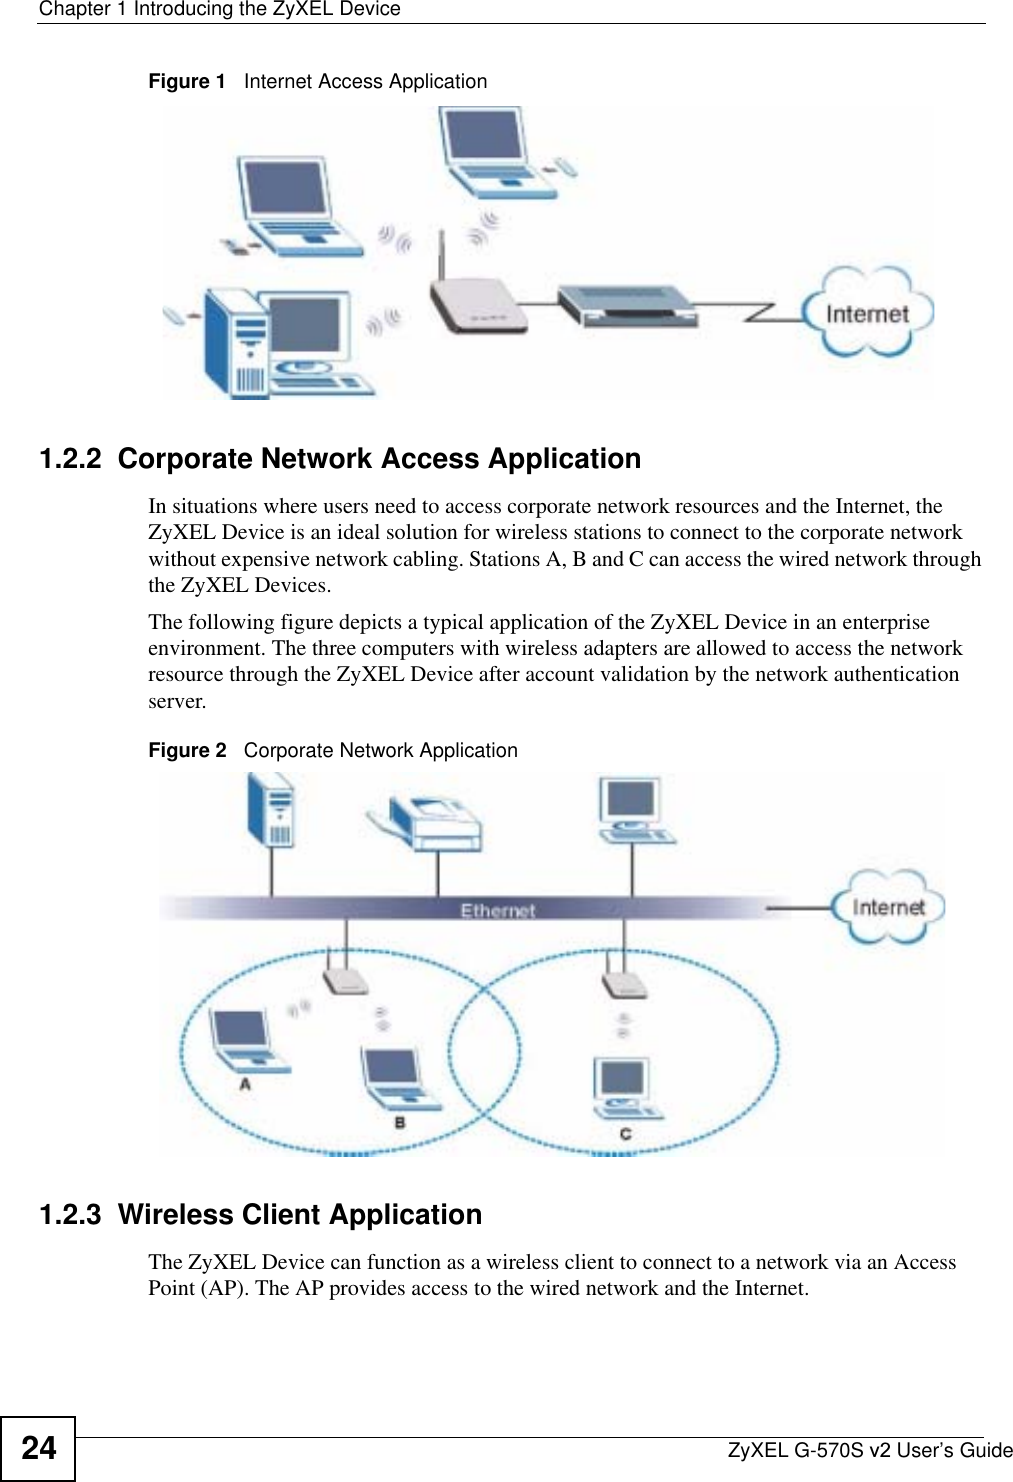 Chapter 1 Introducing the ZyXEL DeviceZyXEL G-570S v2 User’s Guide24Figure 1   Internet Access Application1.2.2  Corporate Network Access ApplicationIn situations where users need to access corporate network resources and the Internet, the ZyXEL Device is an ideal solution for wireless stations to connect to the corporate network without expensive network cabling. Stations A, B and C can access the wired network through the ZyXEL Devices.The following figure depicts a typical application of the ZyXEL Device in an enterprise environment. The three computers with wireless adapters are allowed to access the network resource through the ZyXEL Device after account validation by the network authentication server.Figure 2   Corporate Network Application1.2.3  Wireless Client ApplicationThe ZyXEL Device can function as a wireless client to connect to a network via an Access Point (AP). The AP provides access to the wired network and the Internet. 